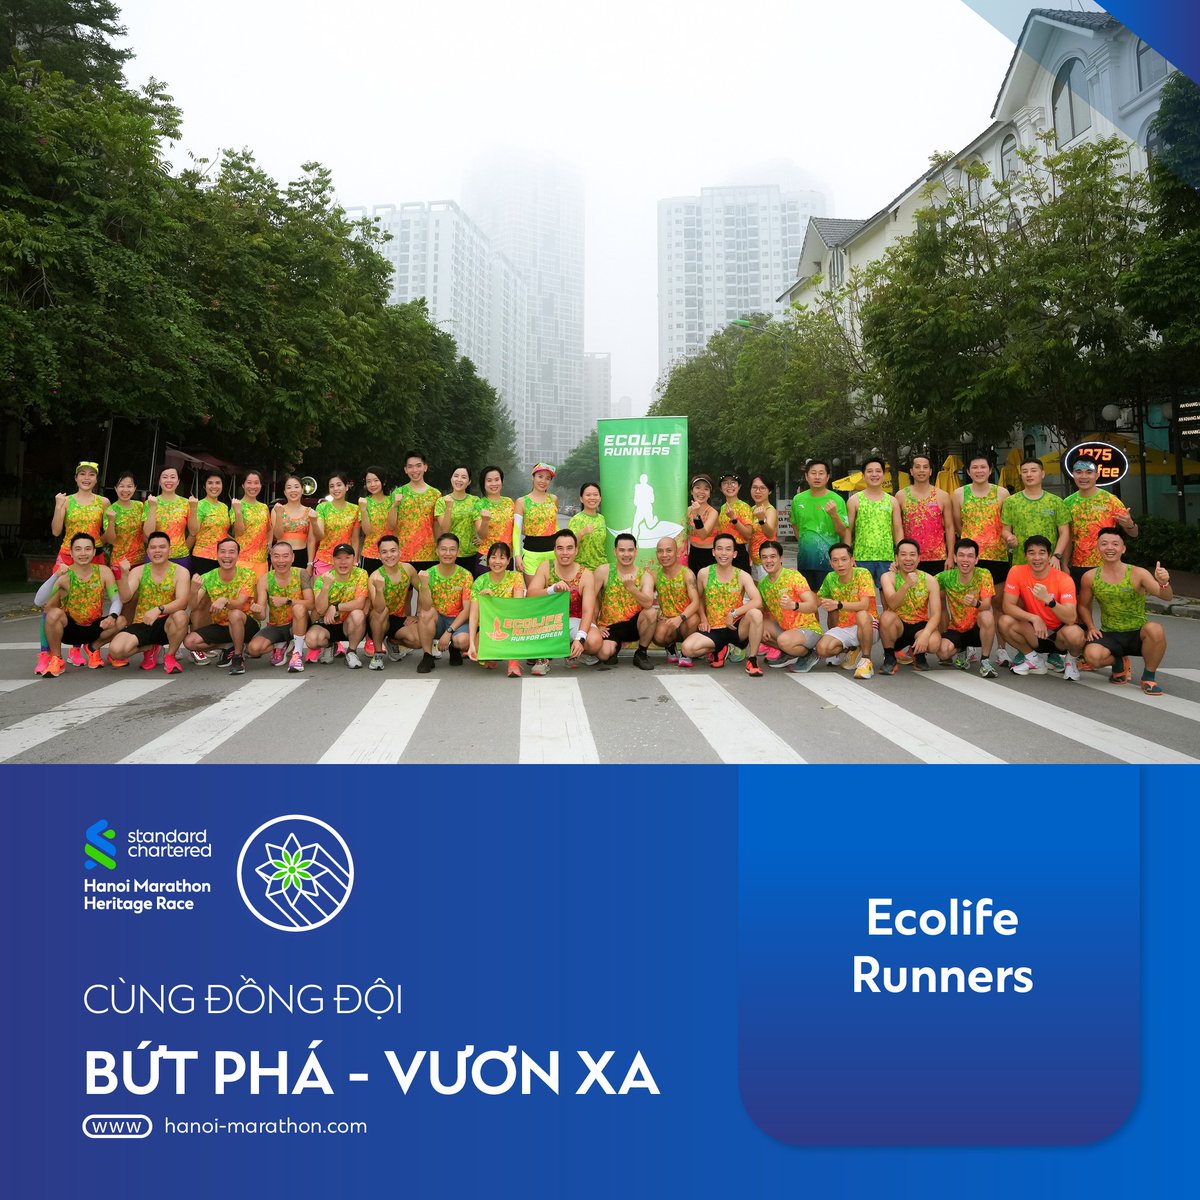 📣Announcing the Top 10 Clubs registered for the program with the highest number of members participating in the Standard Chartered Hanoi Marathon Heritage Race.
🎉 CONGRATULATIONS 🎉
Ecolife Runners
#HanoiMarathon #HeritageRace #SouthEastAsia